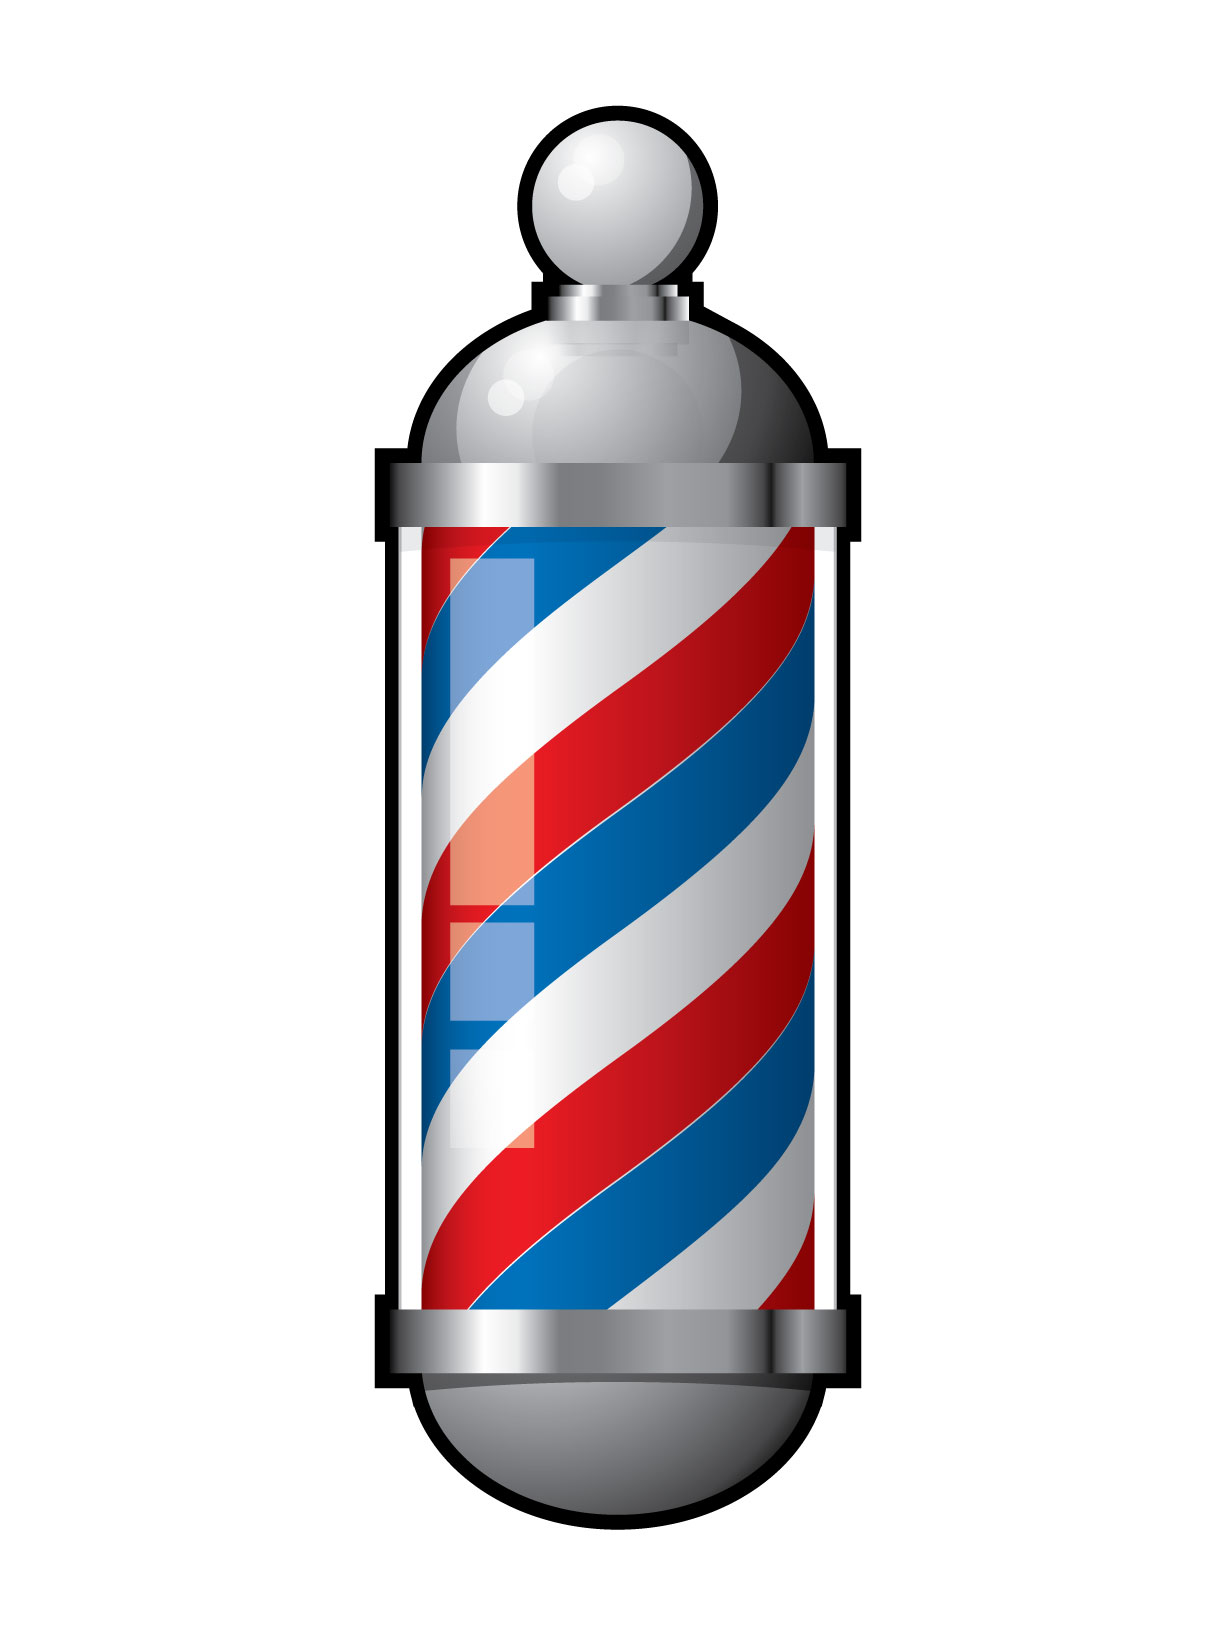 Barber Pole - ClipArt Best